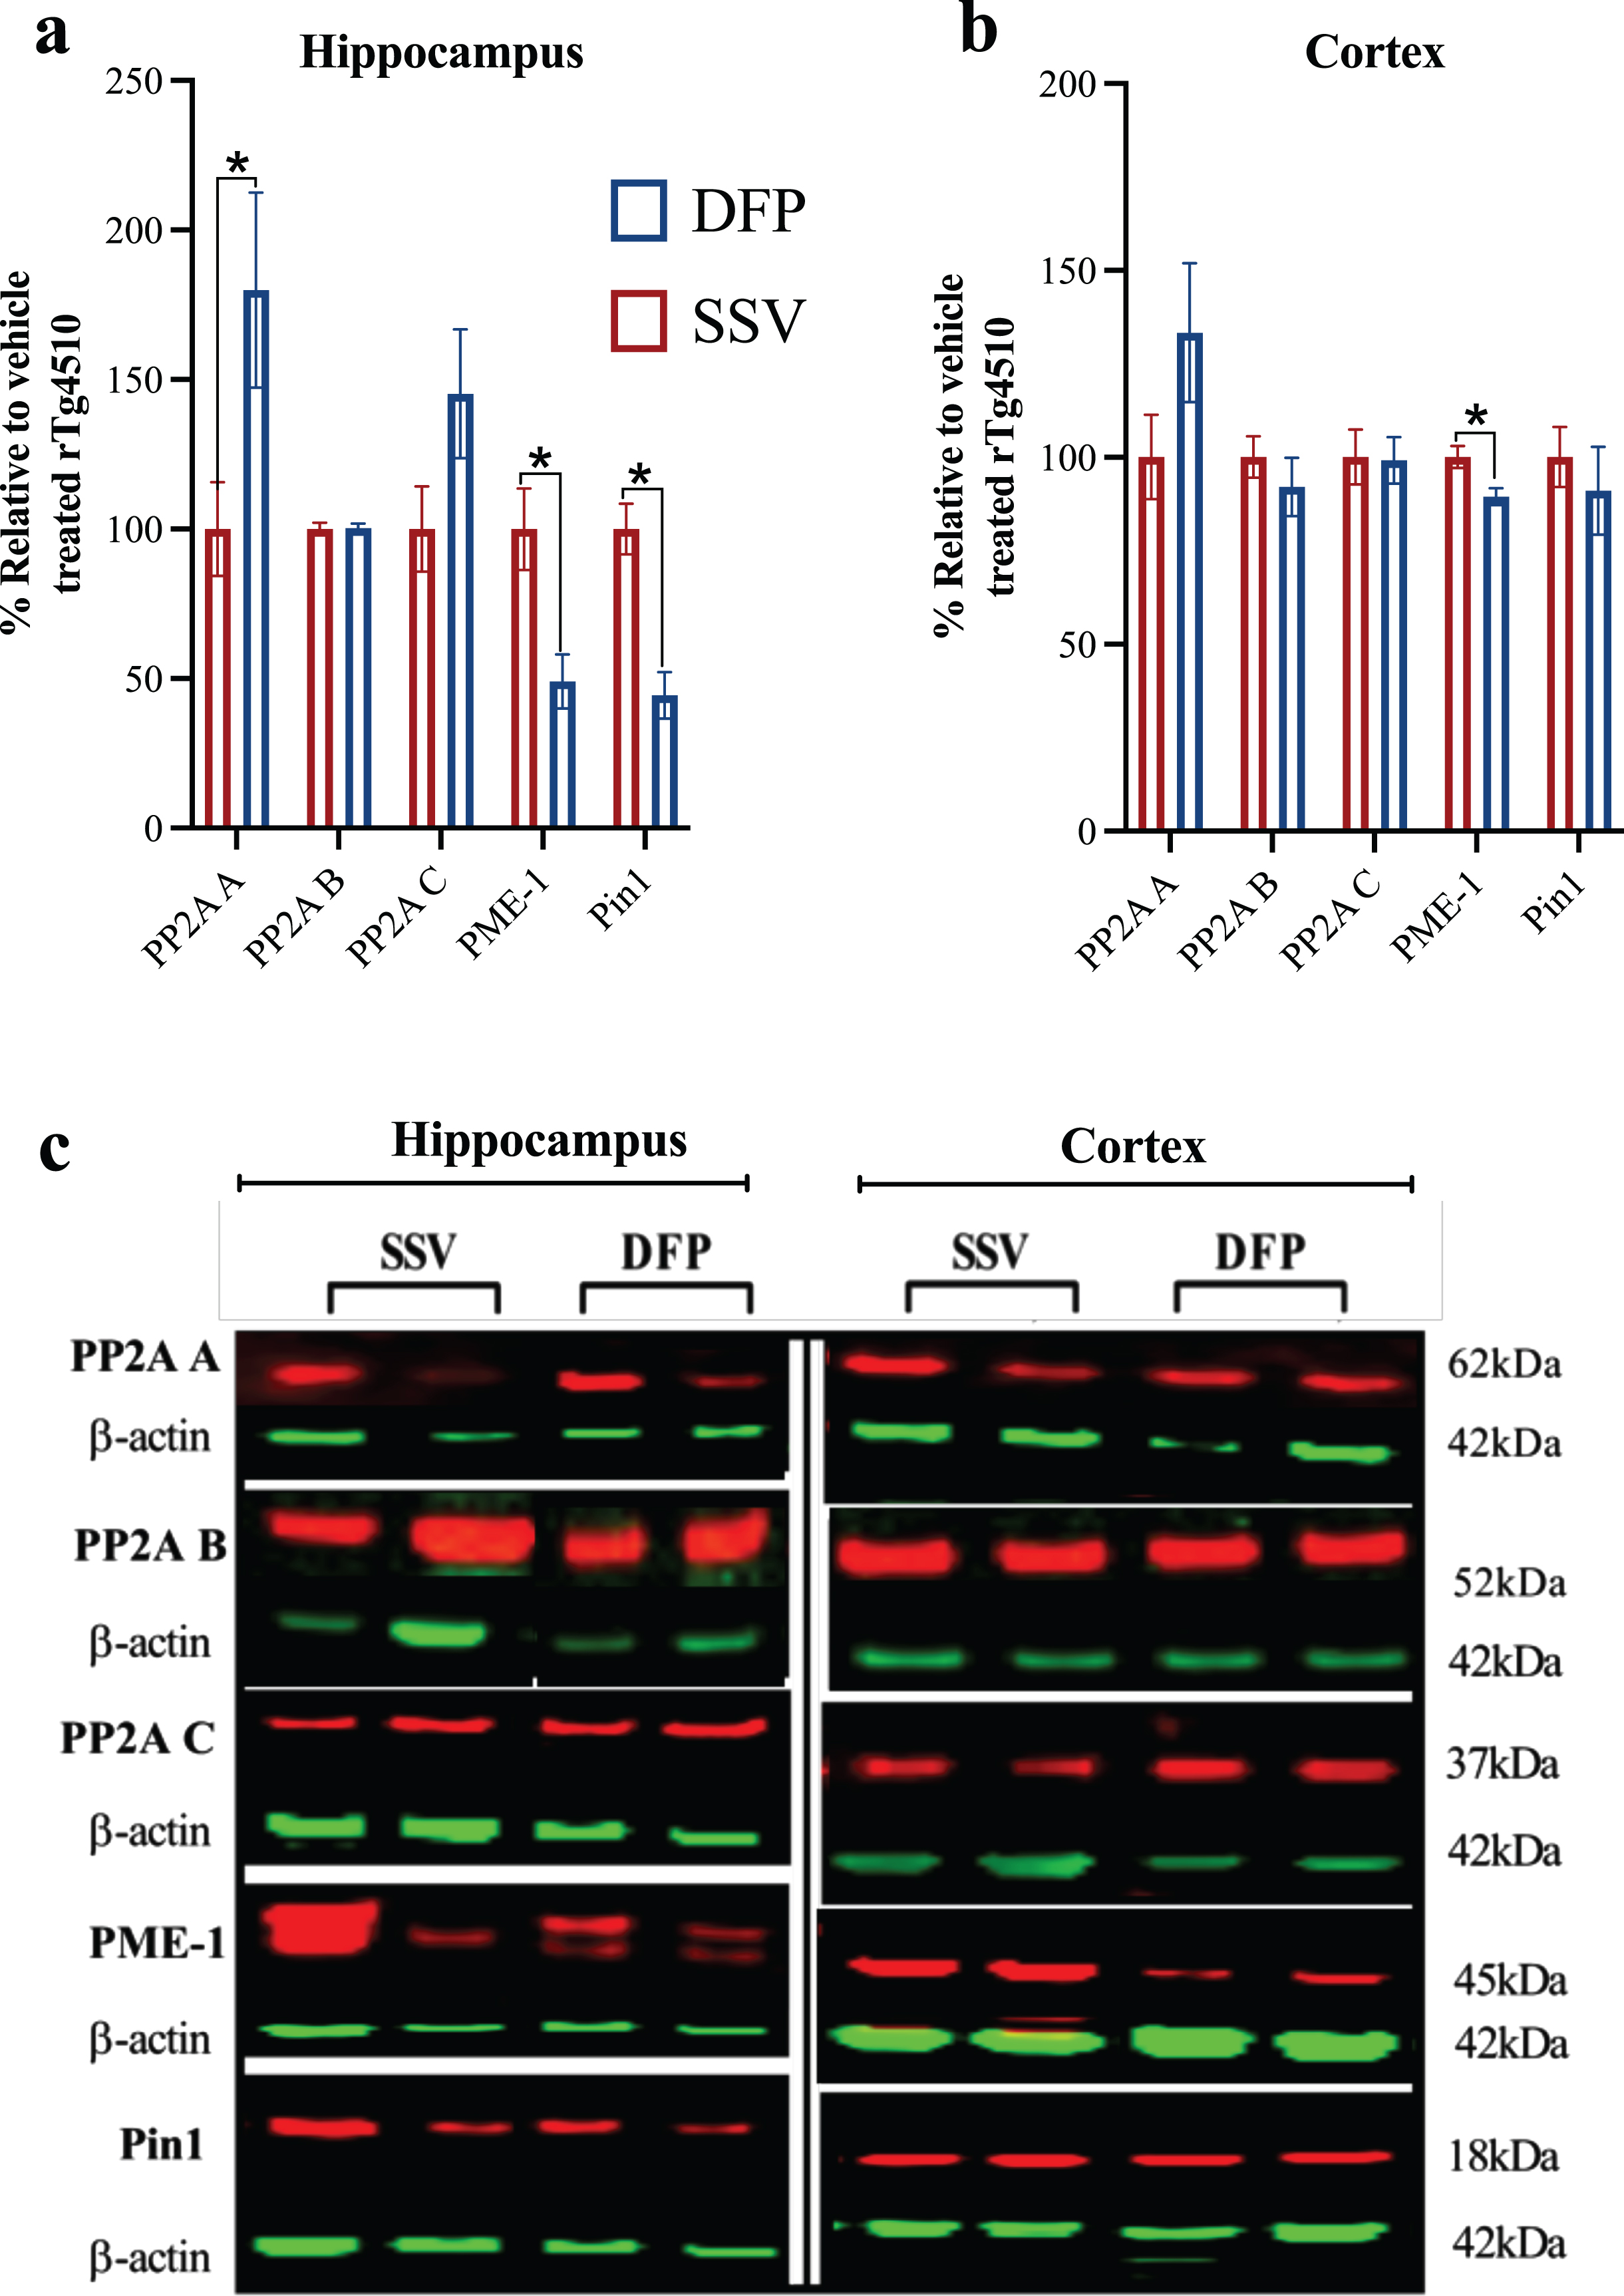 Effect of DFP on PP2A subunits and regulatory proteins. Western blot was used to examine PP2A in the (a) hippocampus and (b) cortex. c) Representative western blots of PP2A subunits and regulatory proteins (note, antibodies may have been probed on the same blot or on stripped blots). Vehicle treated rTg4510 = TgSSV; DFP treated rTg4510 = TgDFP. Unpaired t-test; Error bars represent±SEM. *p < 0.05; **p < 0.001. n = 5– 6/group.